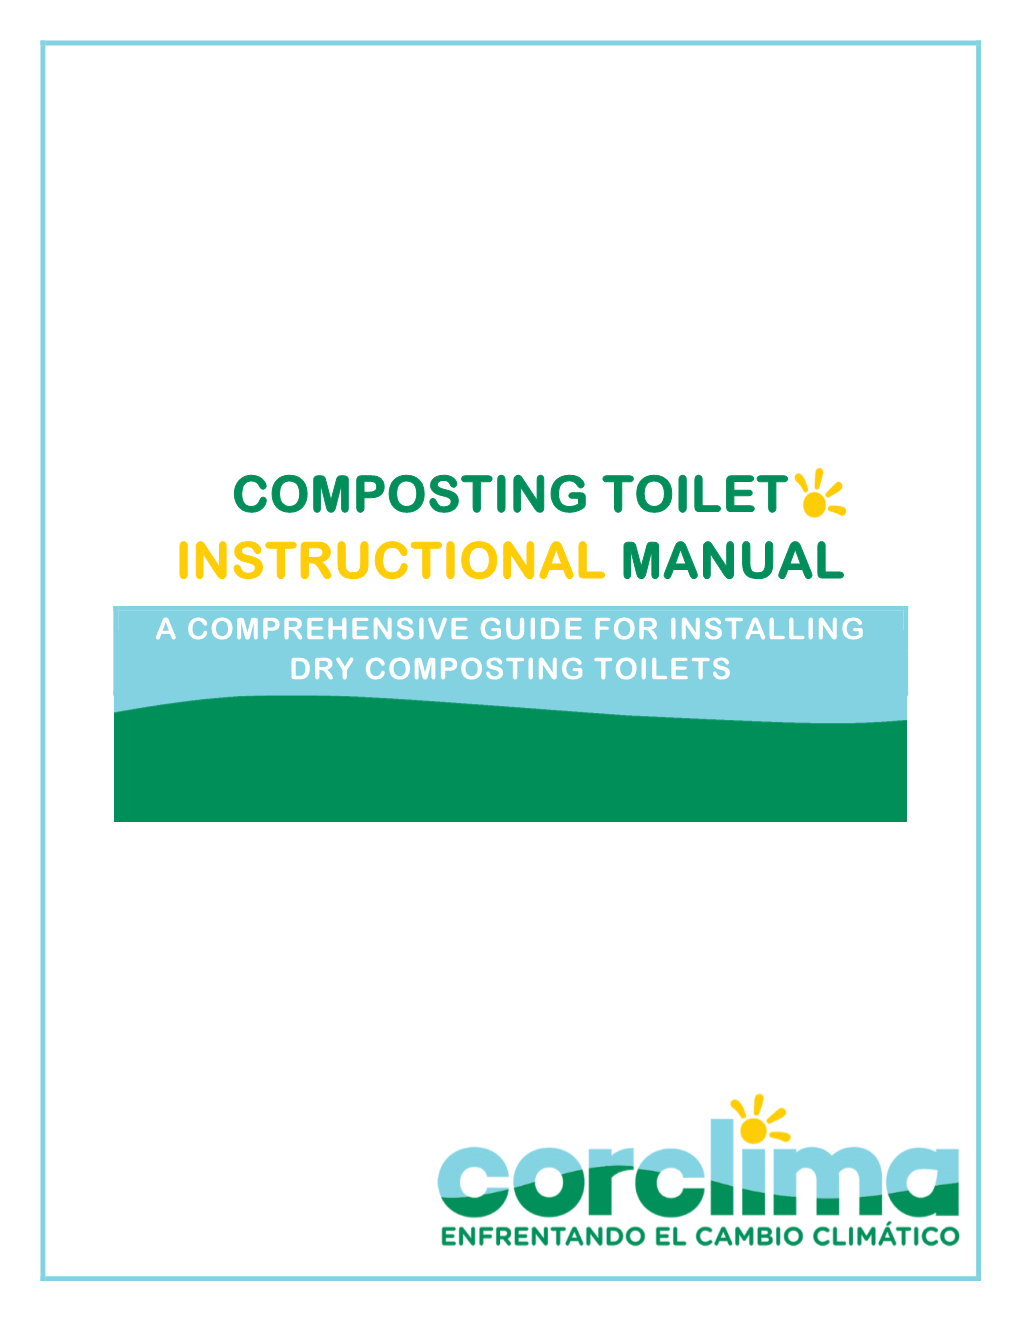 Composting Toilet Instructional Manual a Comprehensive Guide for Installing Dry Composting Toilets